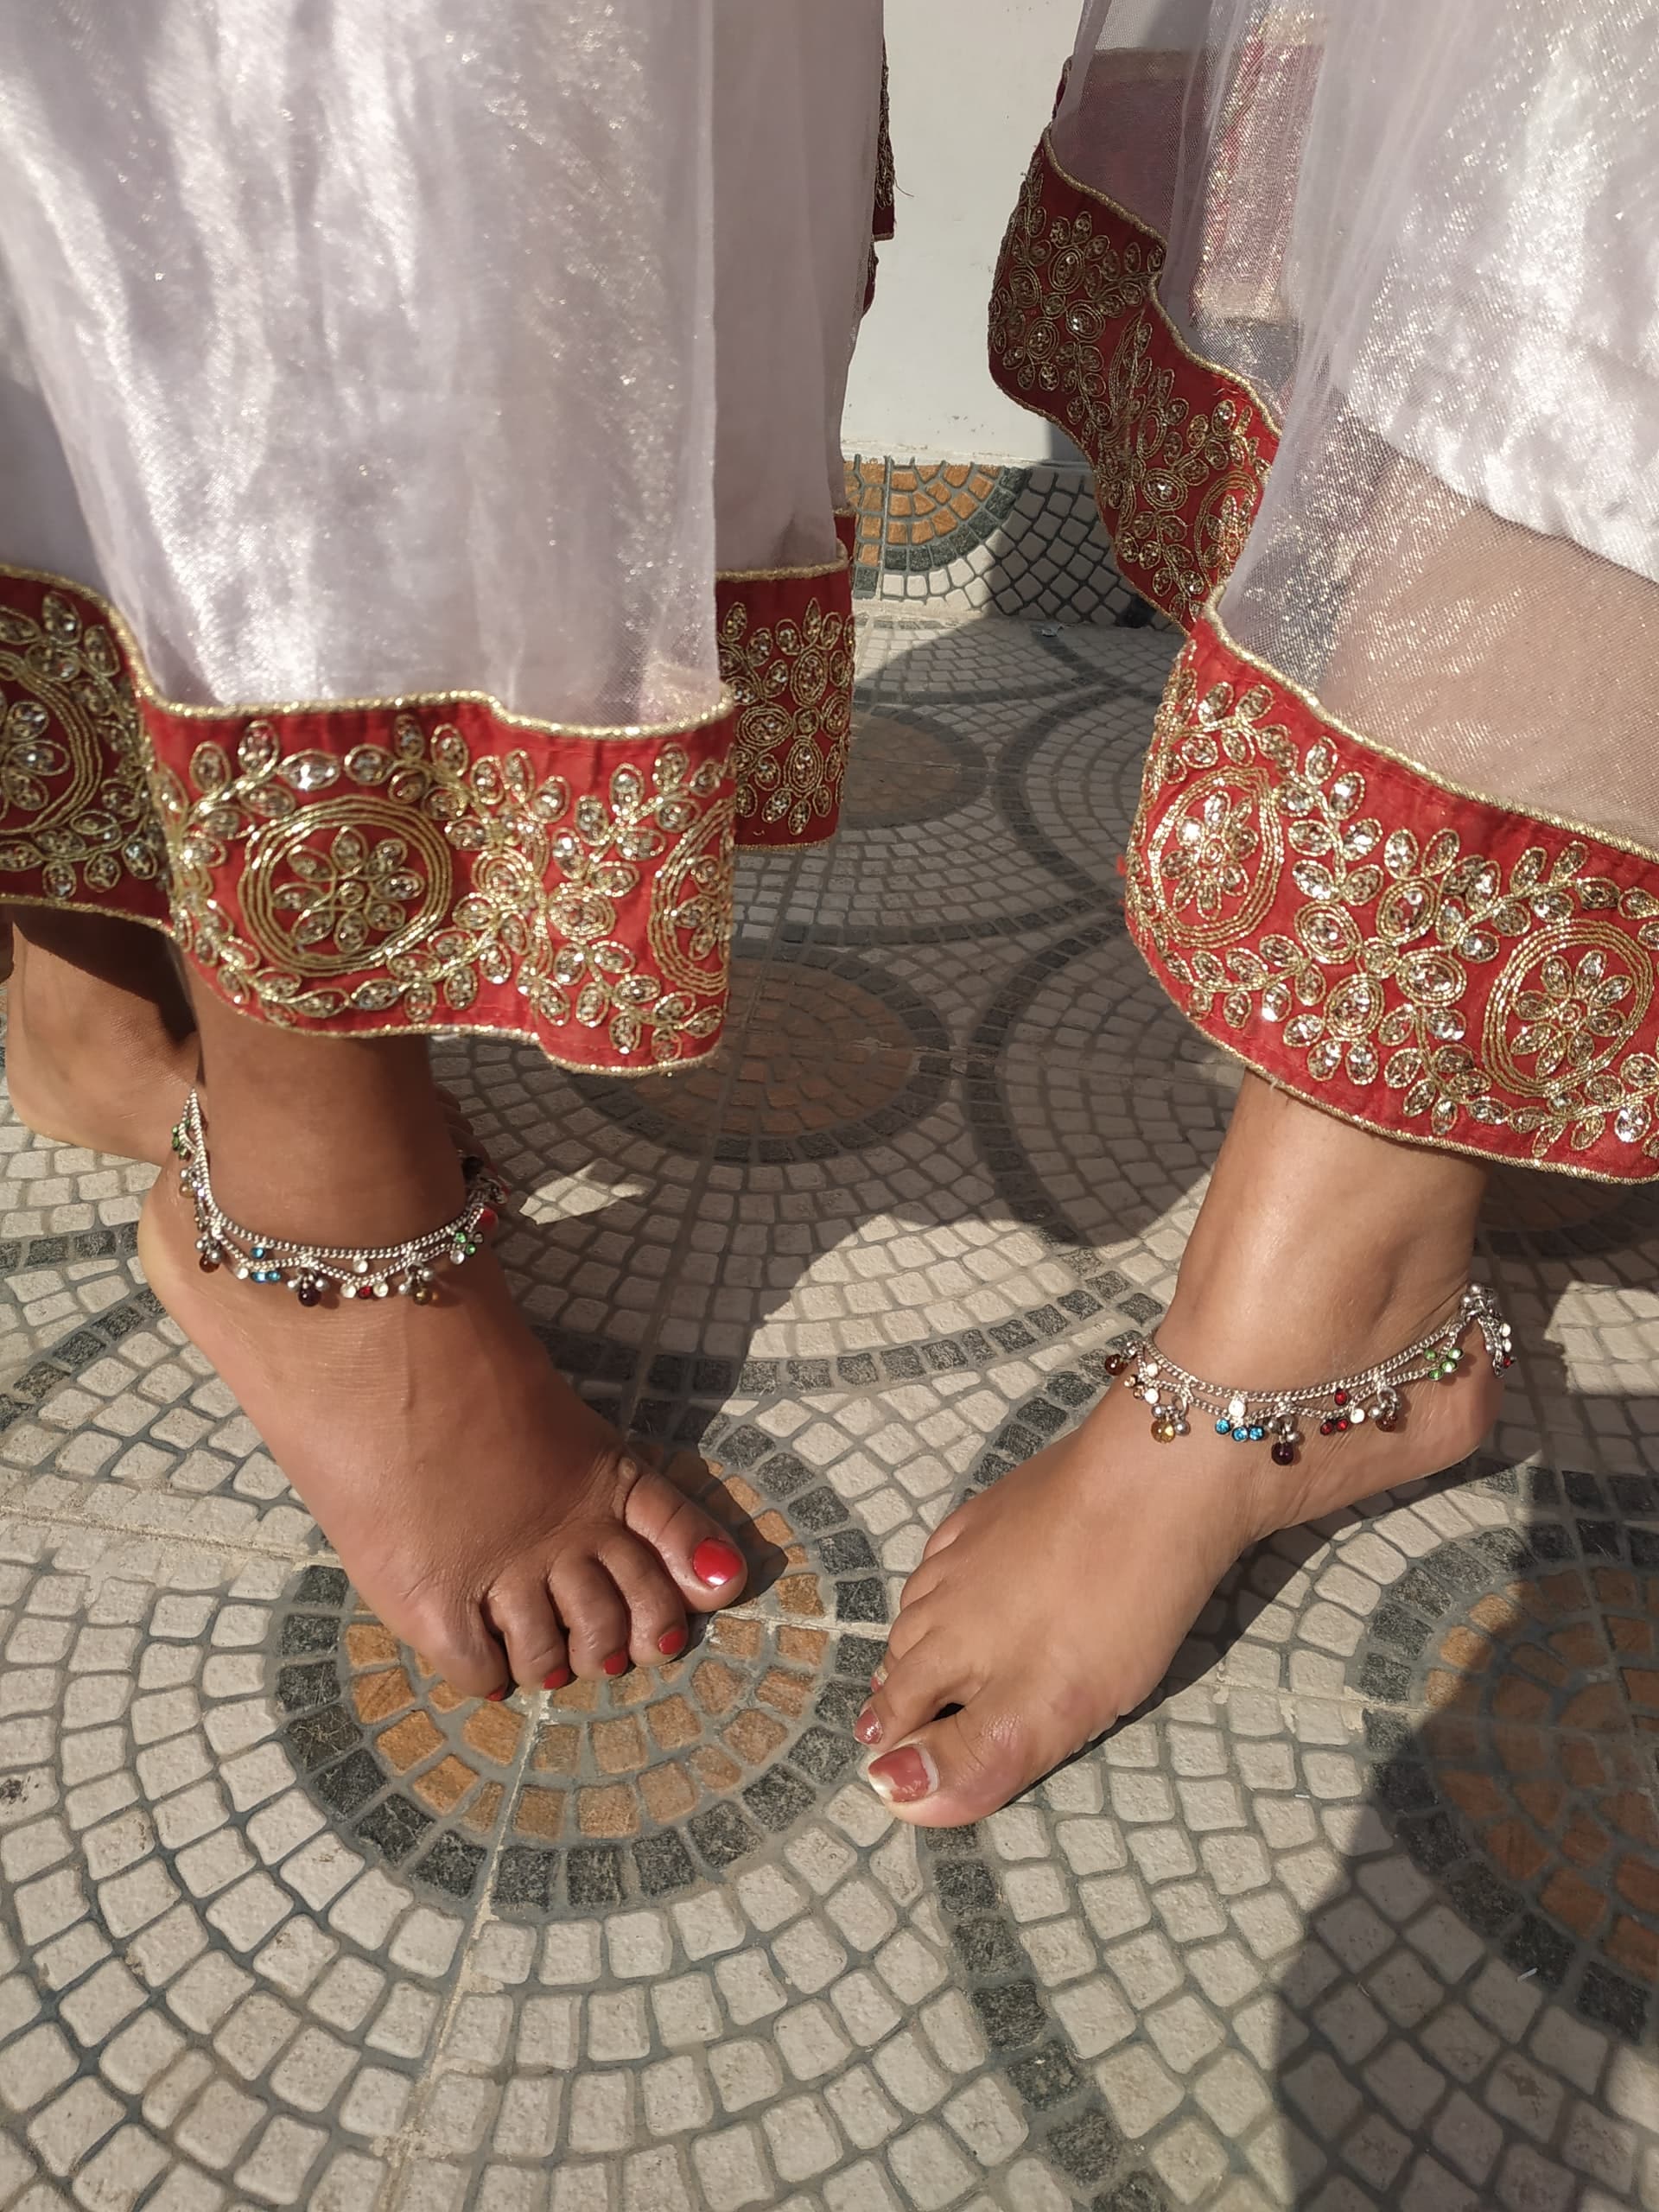 Meaning Behind Anklets Article Image